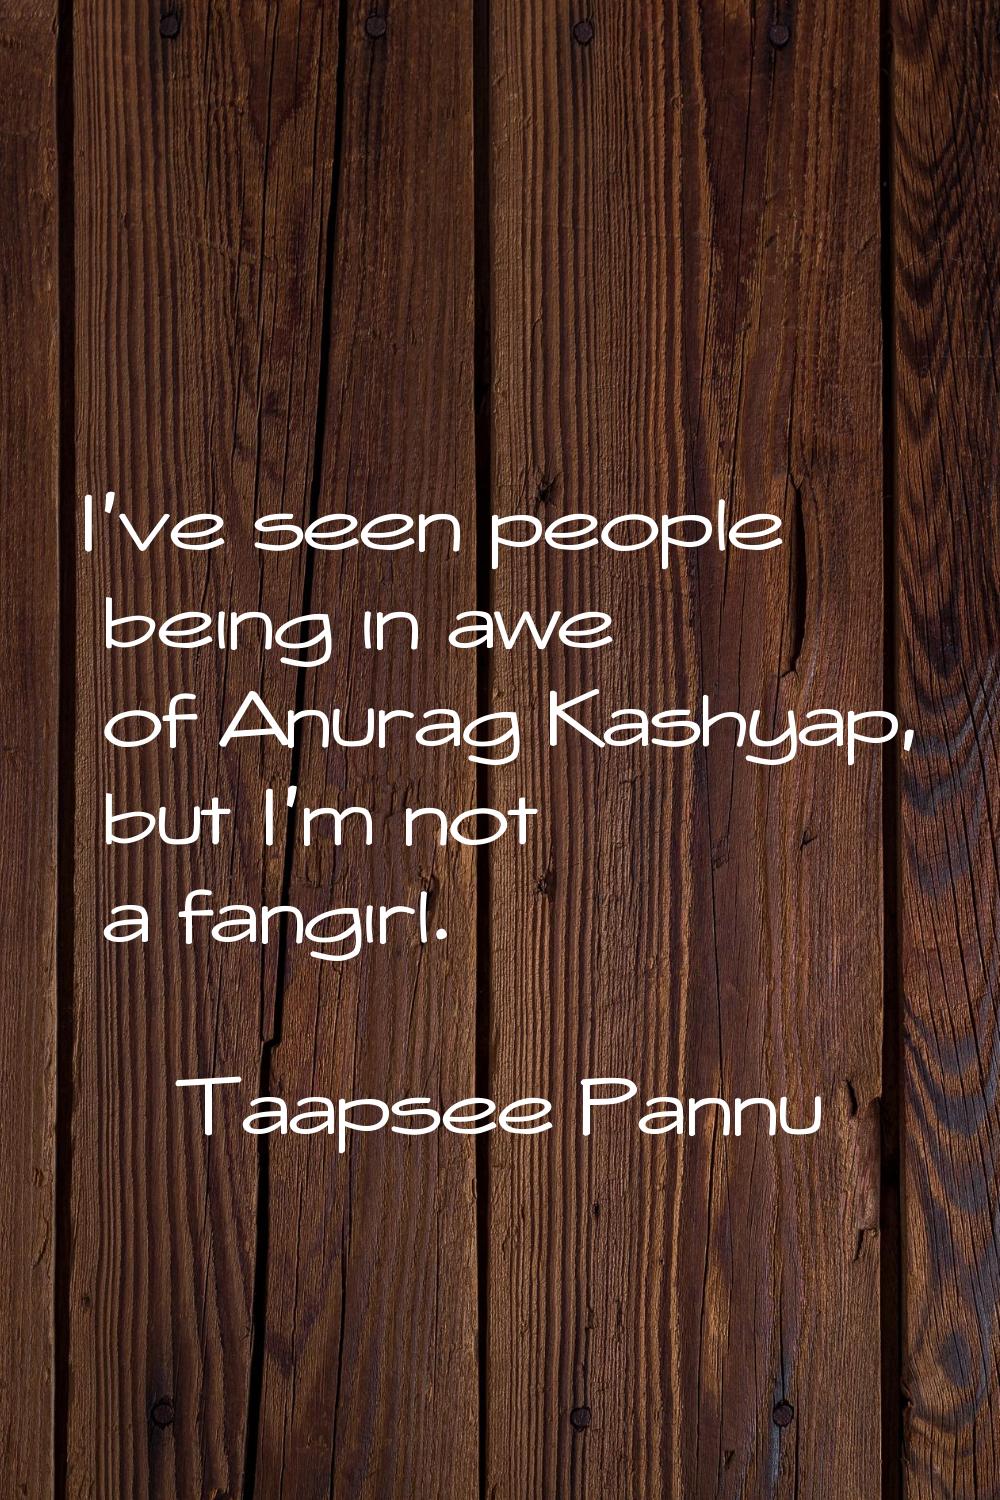 I've seen people being in awe of Anurag Kashyap, but I'm not a fangirl.